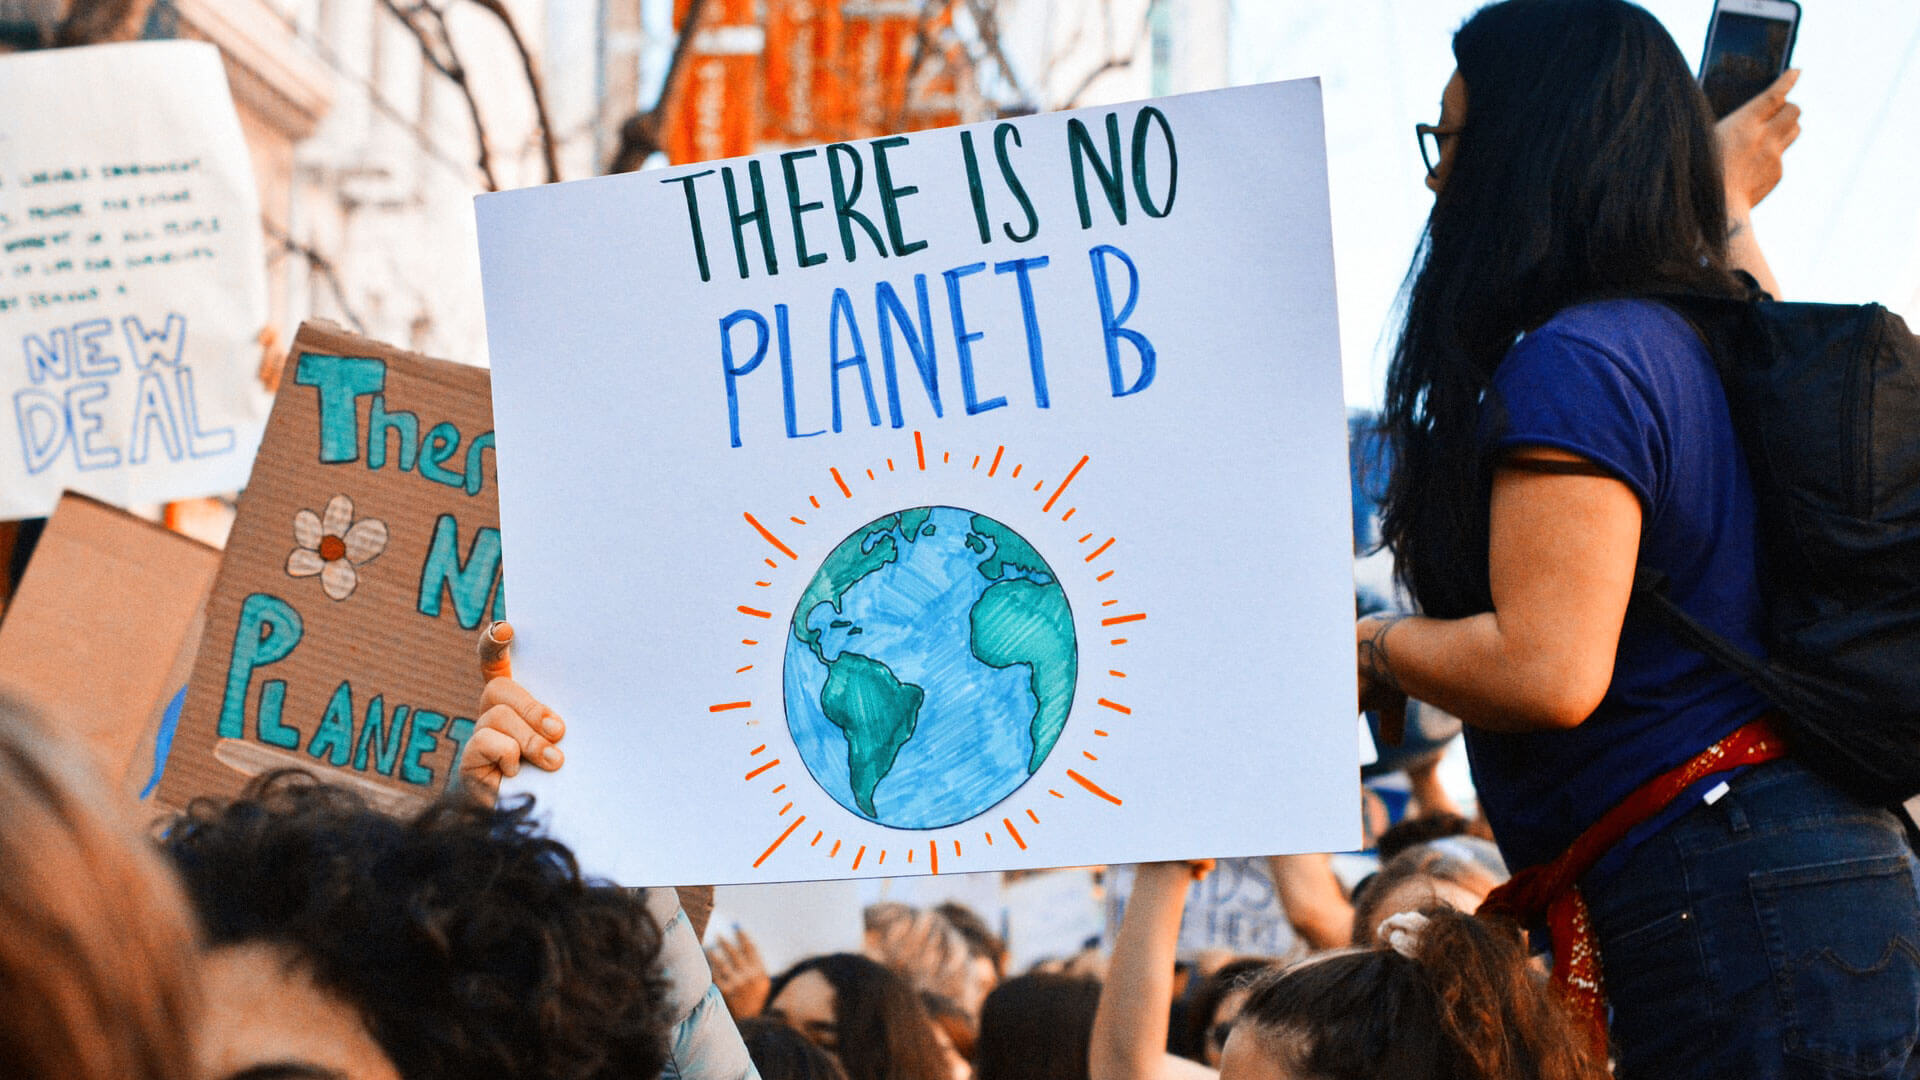 cartaz there is no planet b